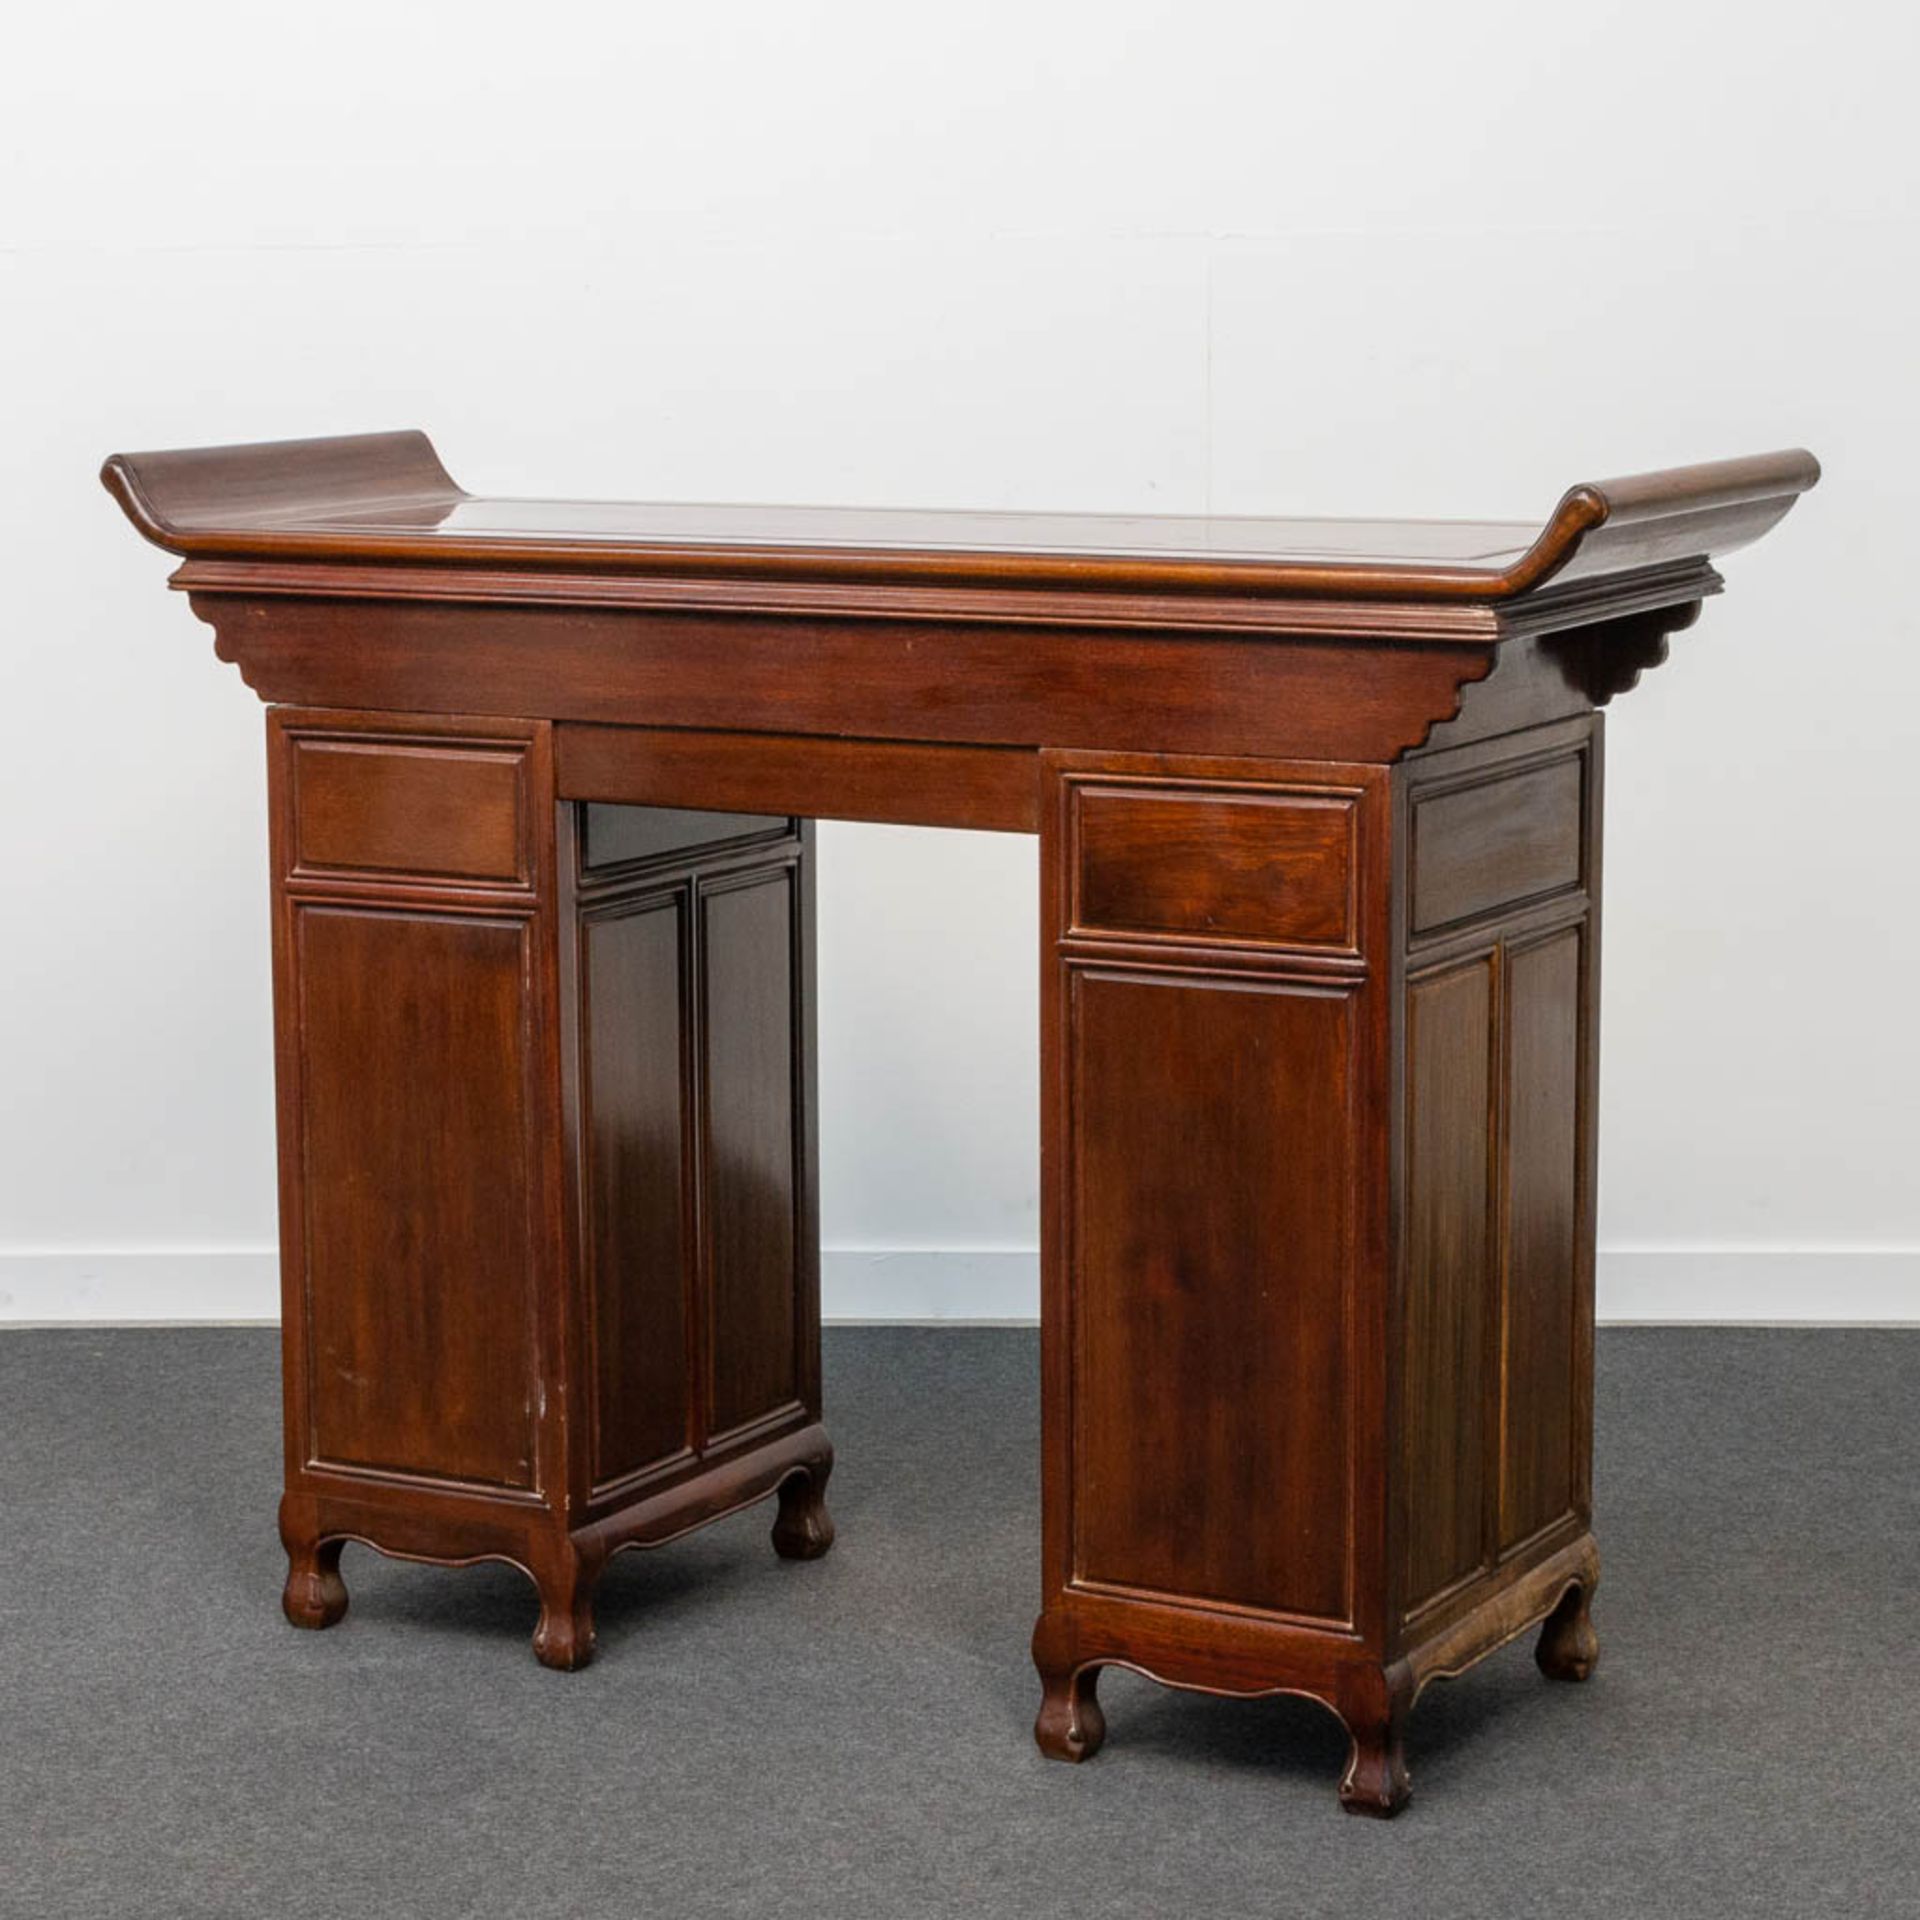 A Chinese hardwood Scroll Desk - Image 7 of 23